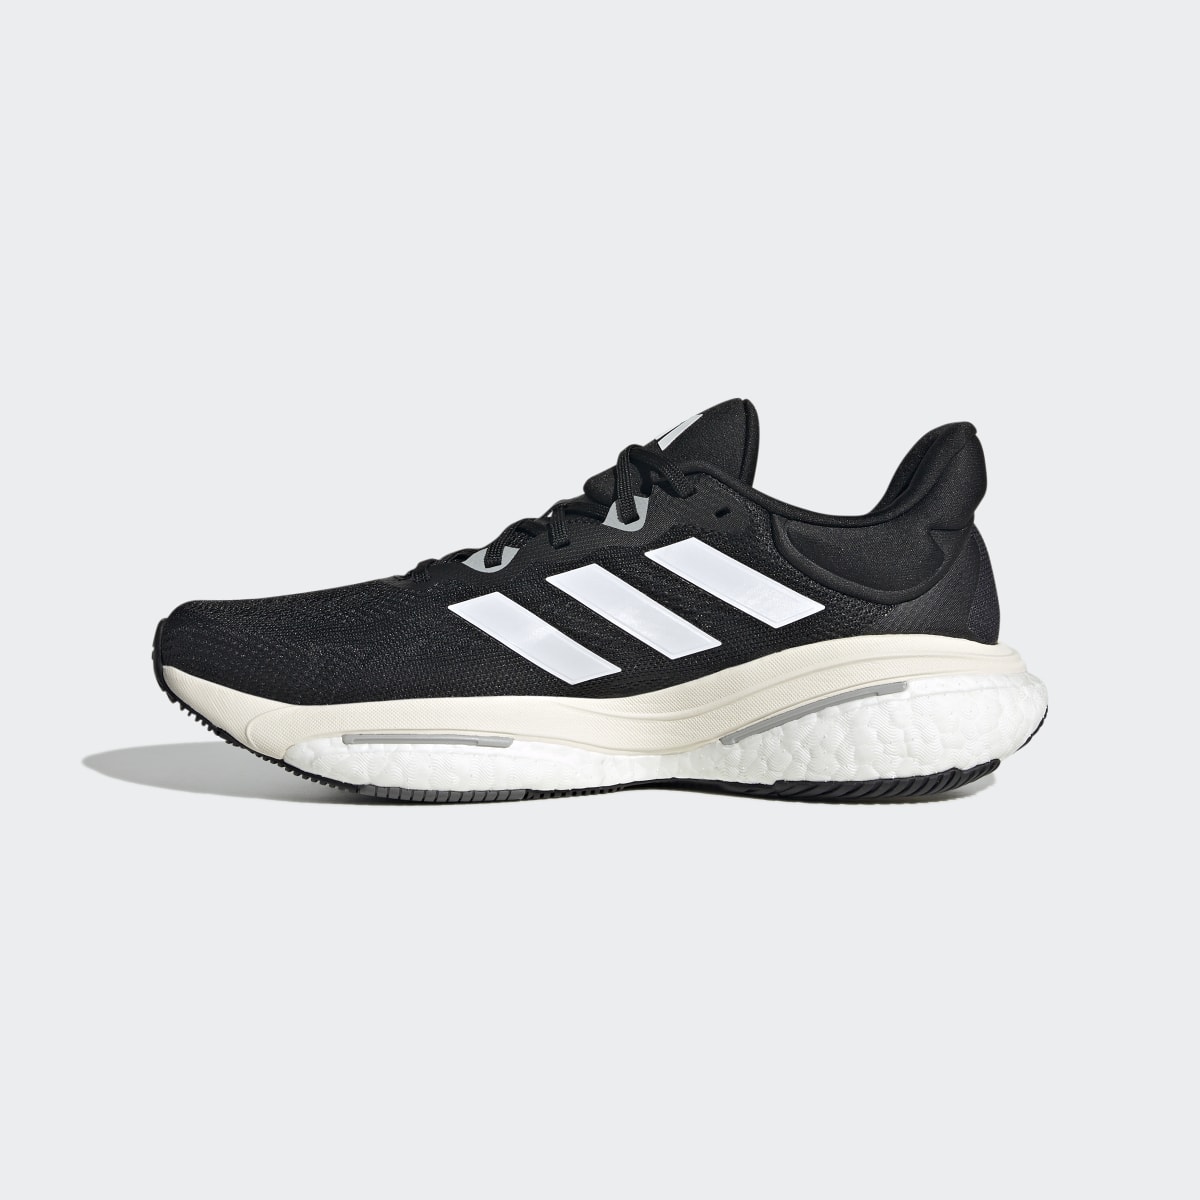 Adidas Solarglide 6 Running Shoes. 7